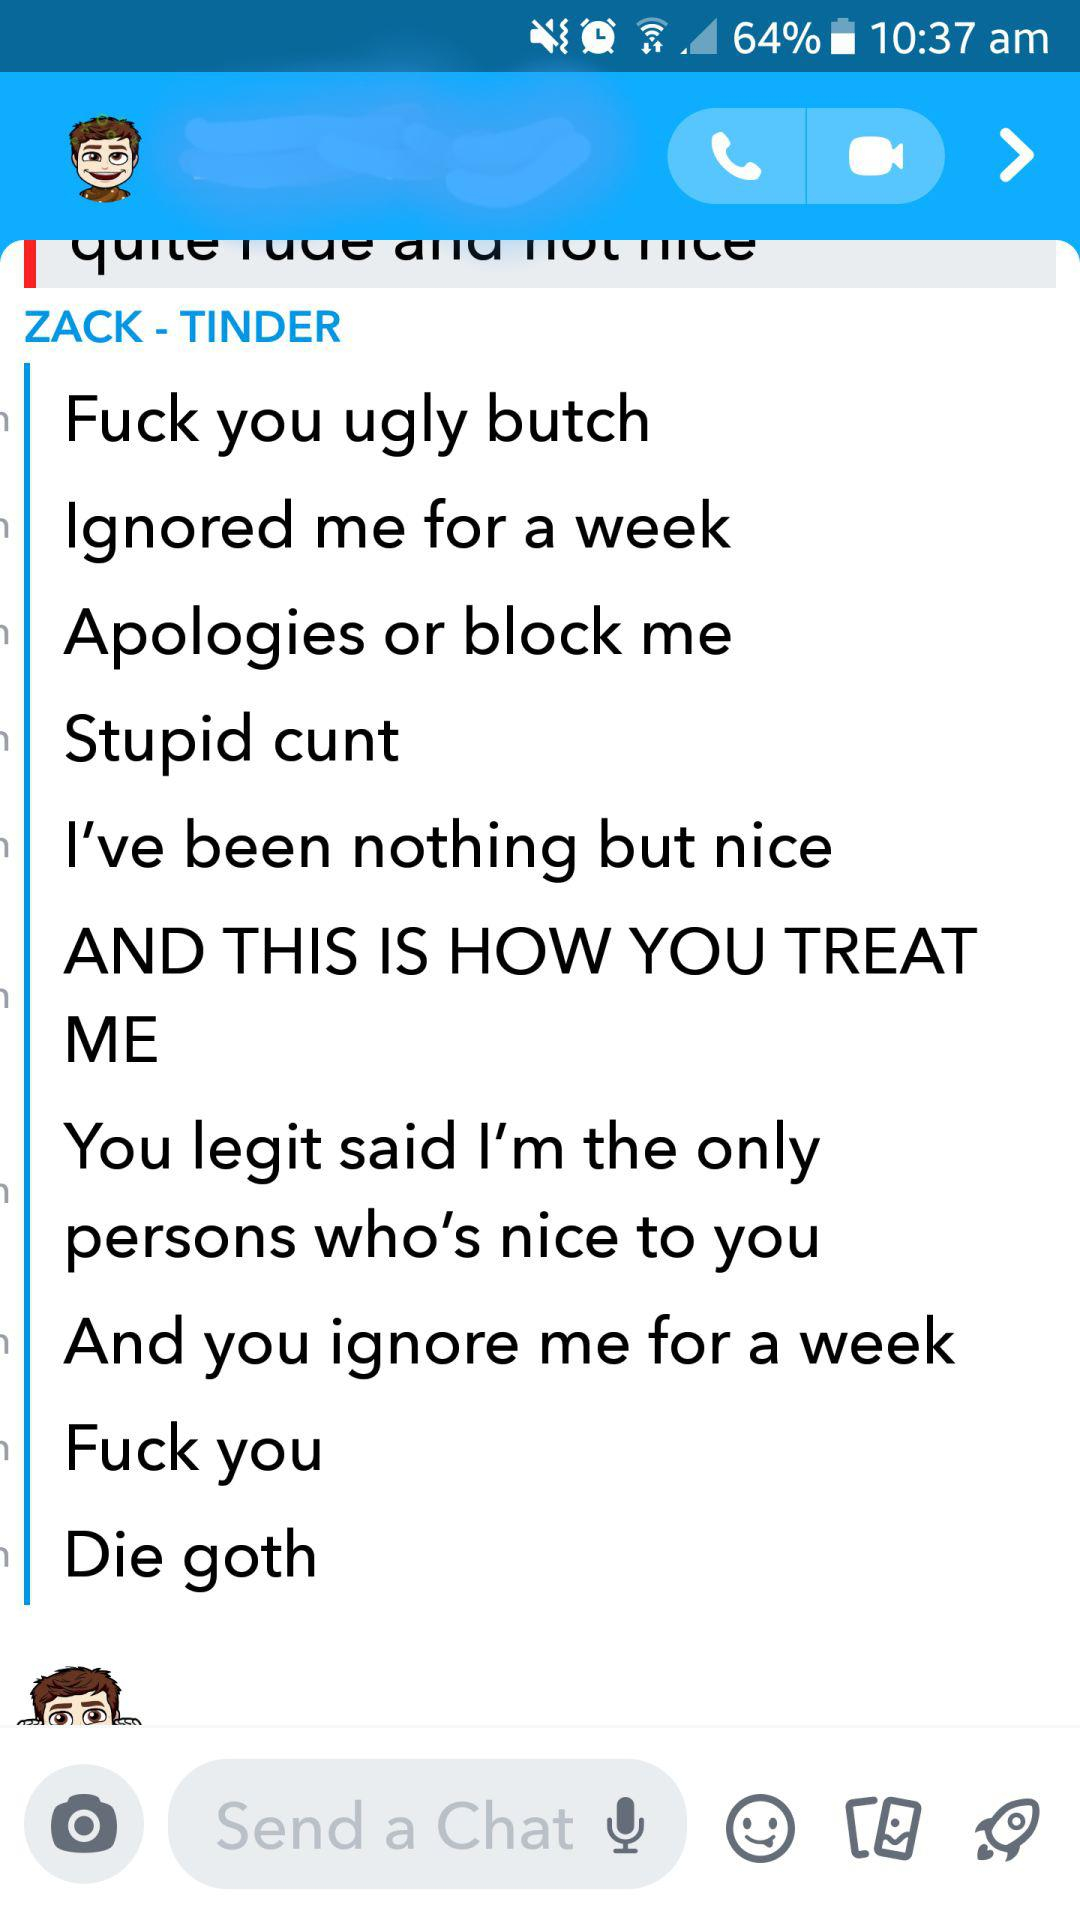 matt mcgorry tweet - O d 64% qunle Tuue and notice Zack Tinder Fuck you ugly butch Ignored me for a week Apologies or block me Stupid cunt I've been nothing but nice And This Is How You Treat Me You legit said I'm the only persons who's nice to you And yo